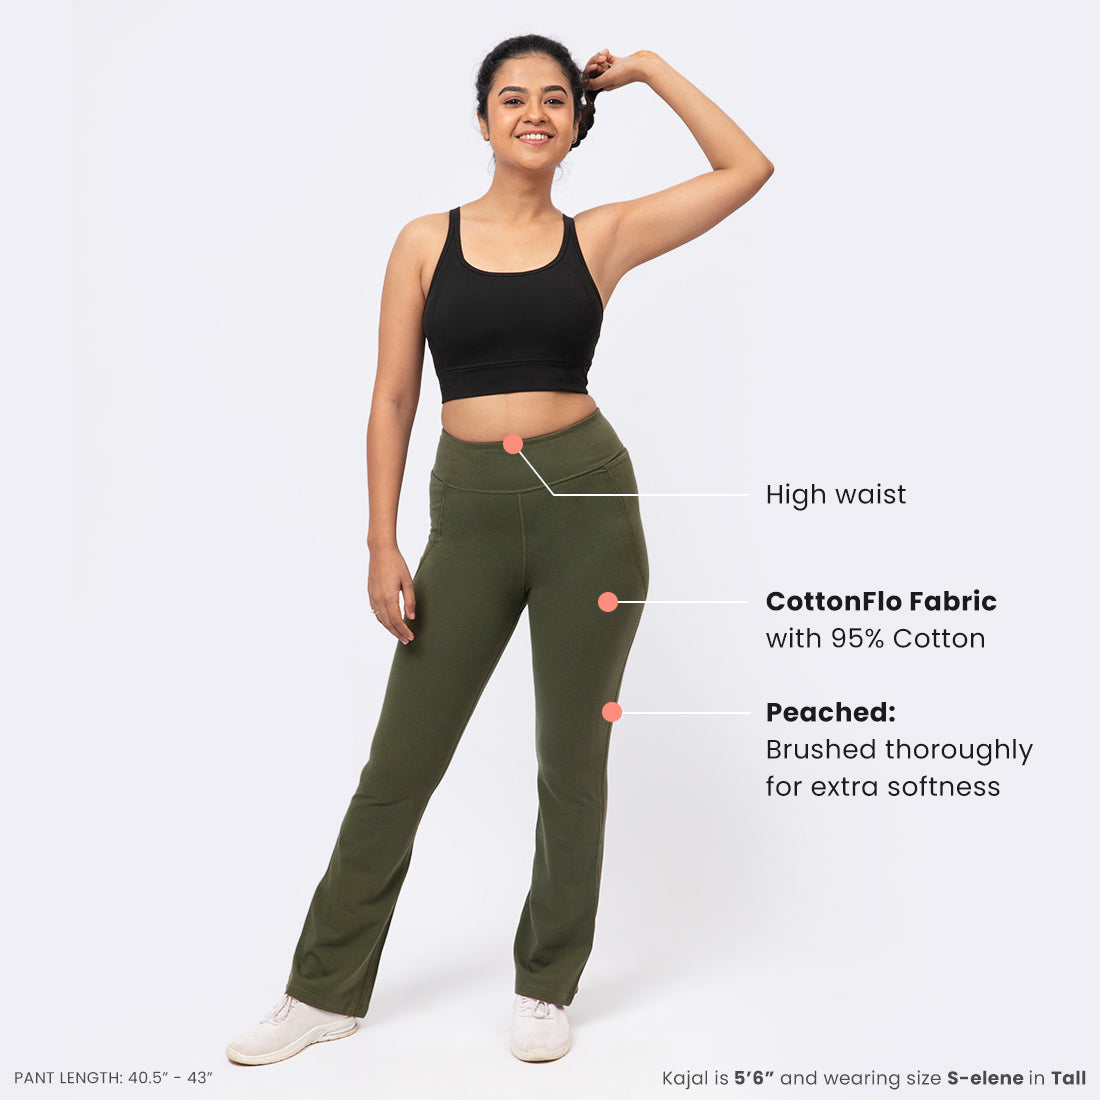 The Groove-In Cotton Flare Pants